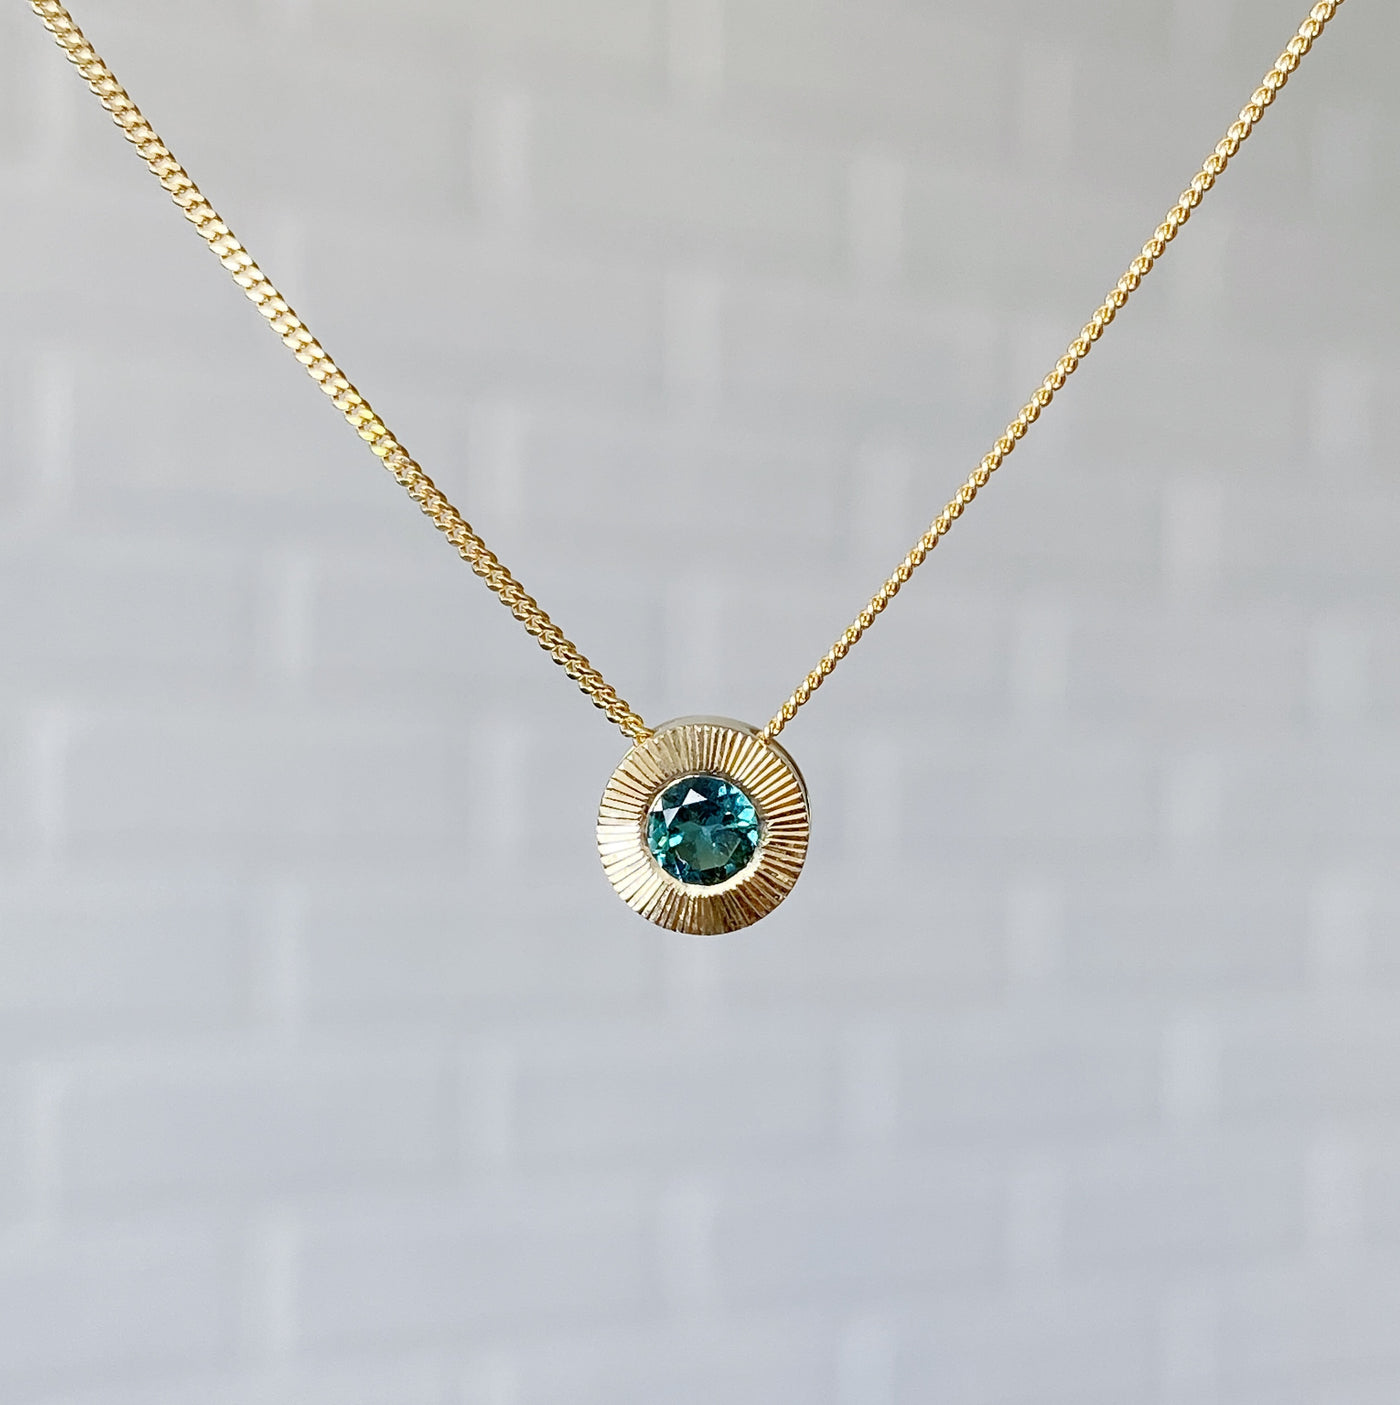 14k yellow gold medium Aurora necklace with a round teal green indicolite tourmaline center and engraved rays halo border in natural light